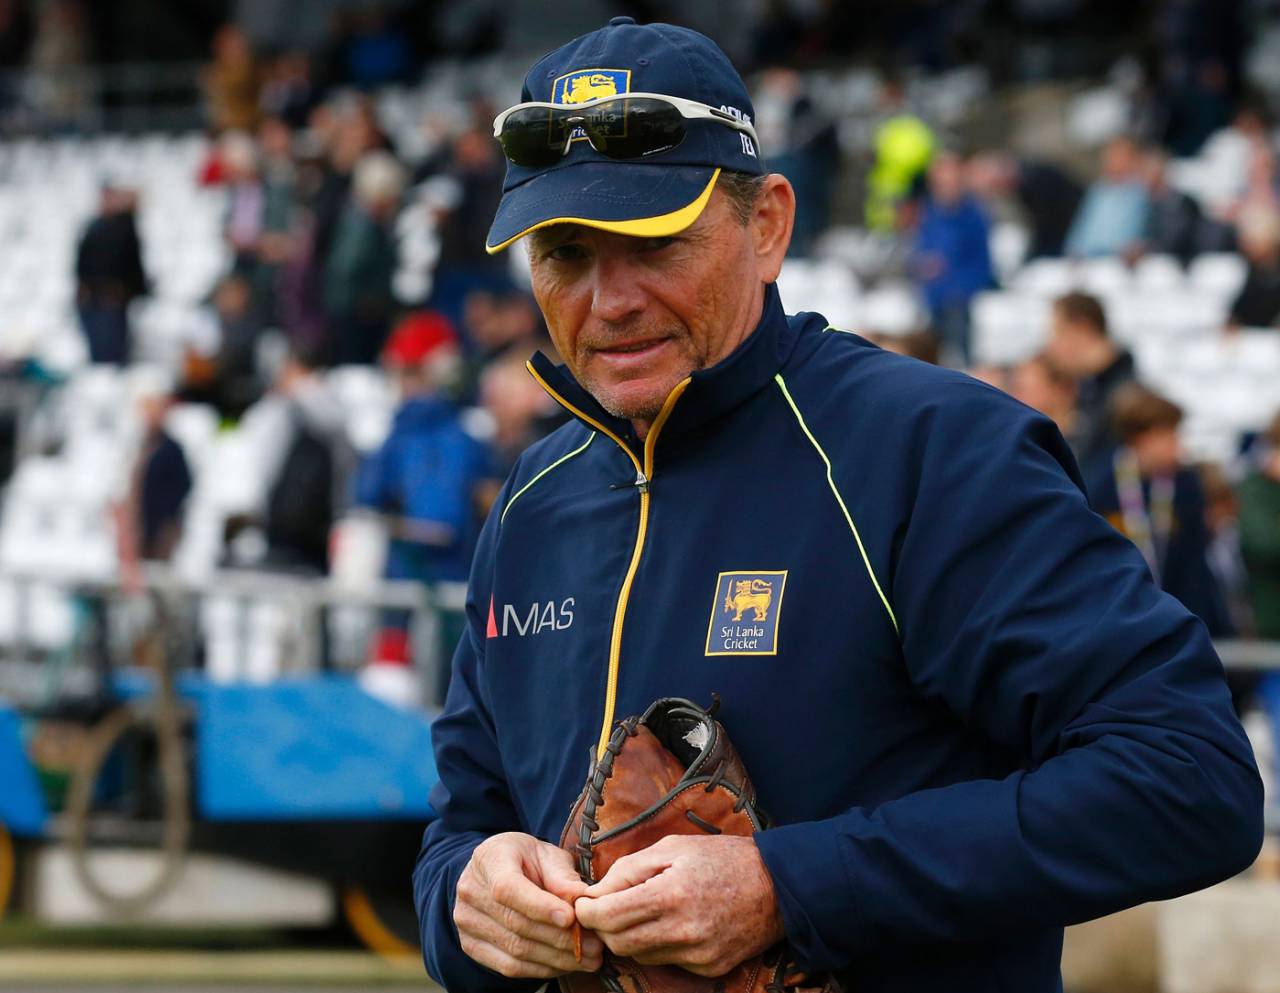 Graham Ford stepped down as Sri Lanka's head coach in June, after 15 months in the job&nbsp;&nbsp;&bull;&nbsp;&nbsp;Getty Images